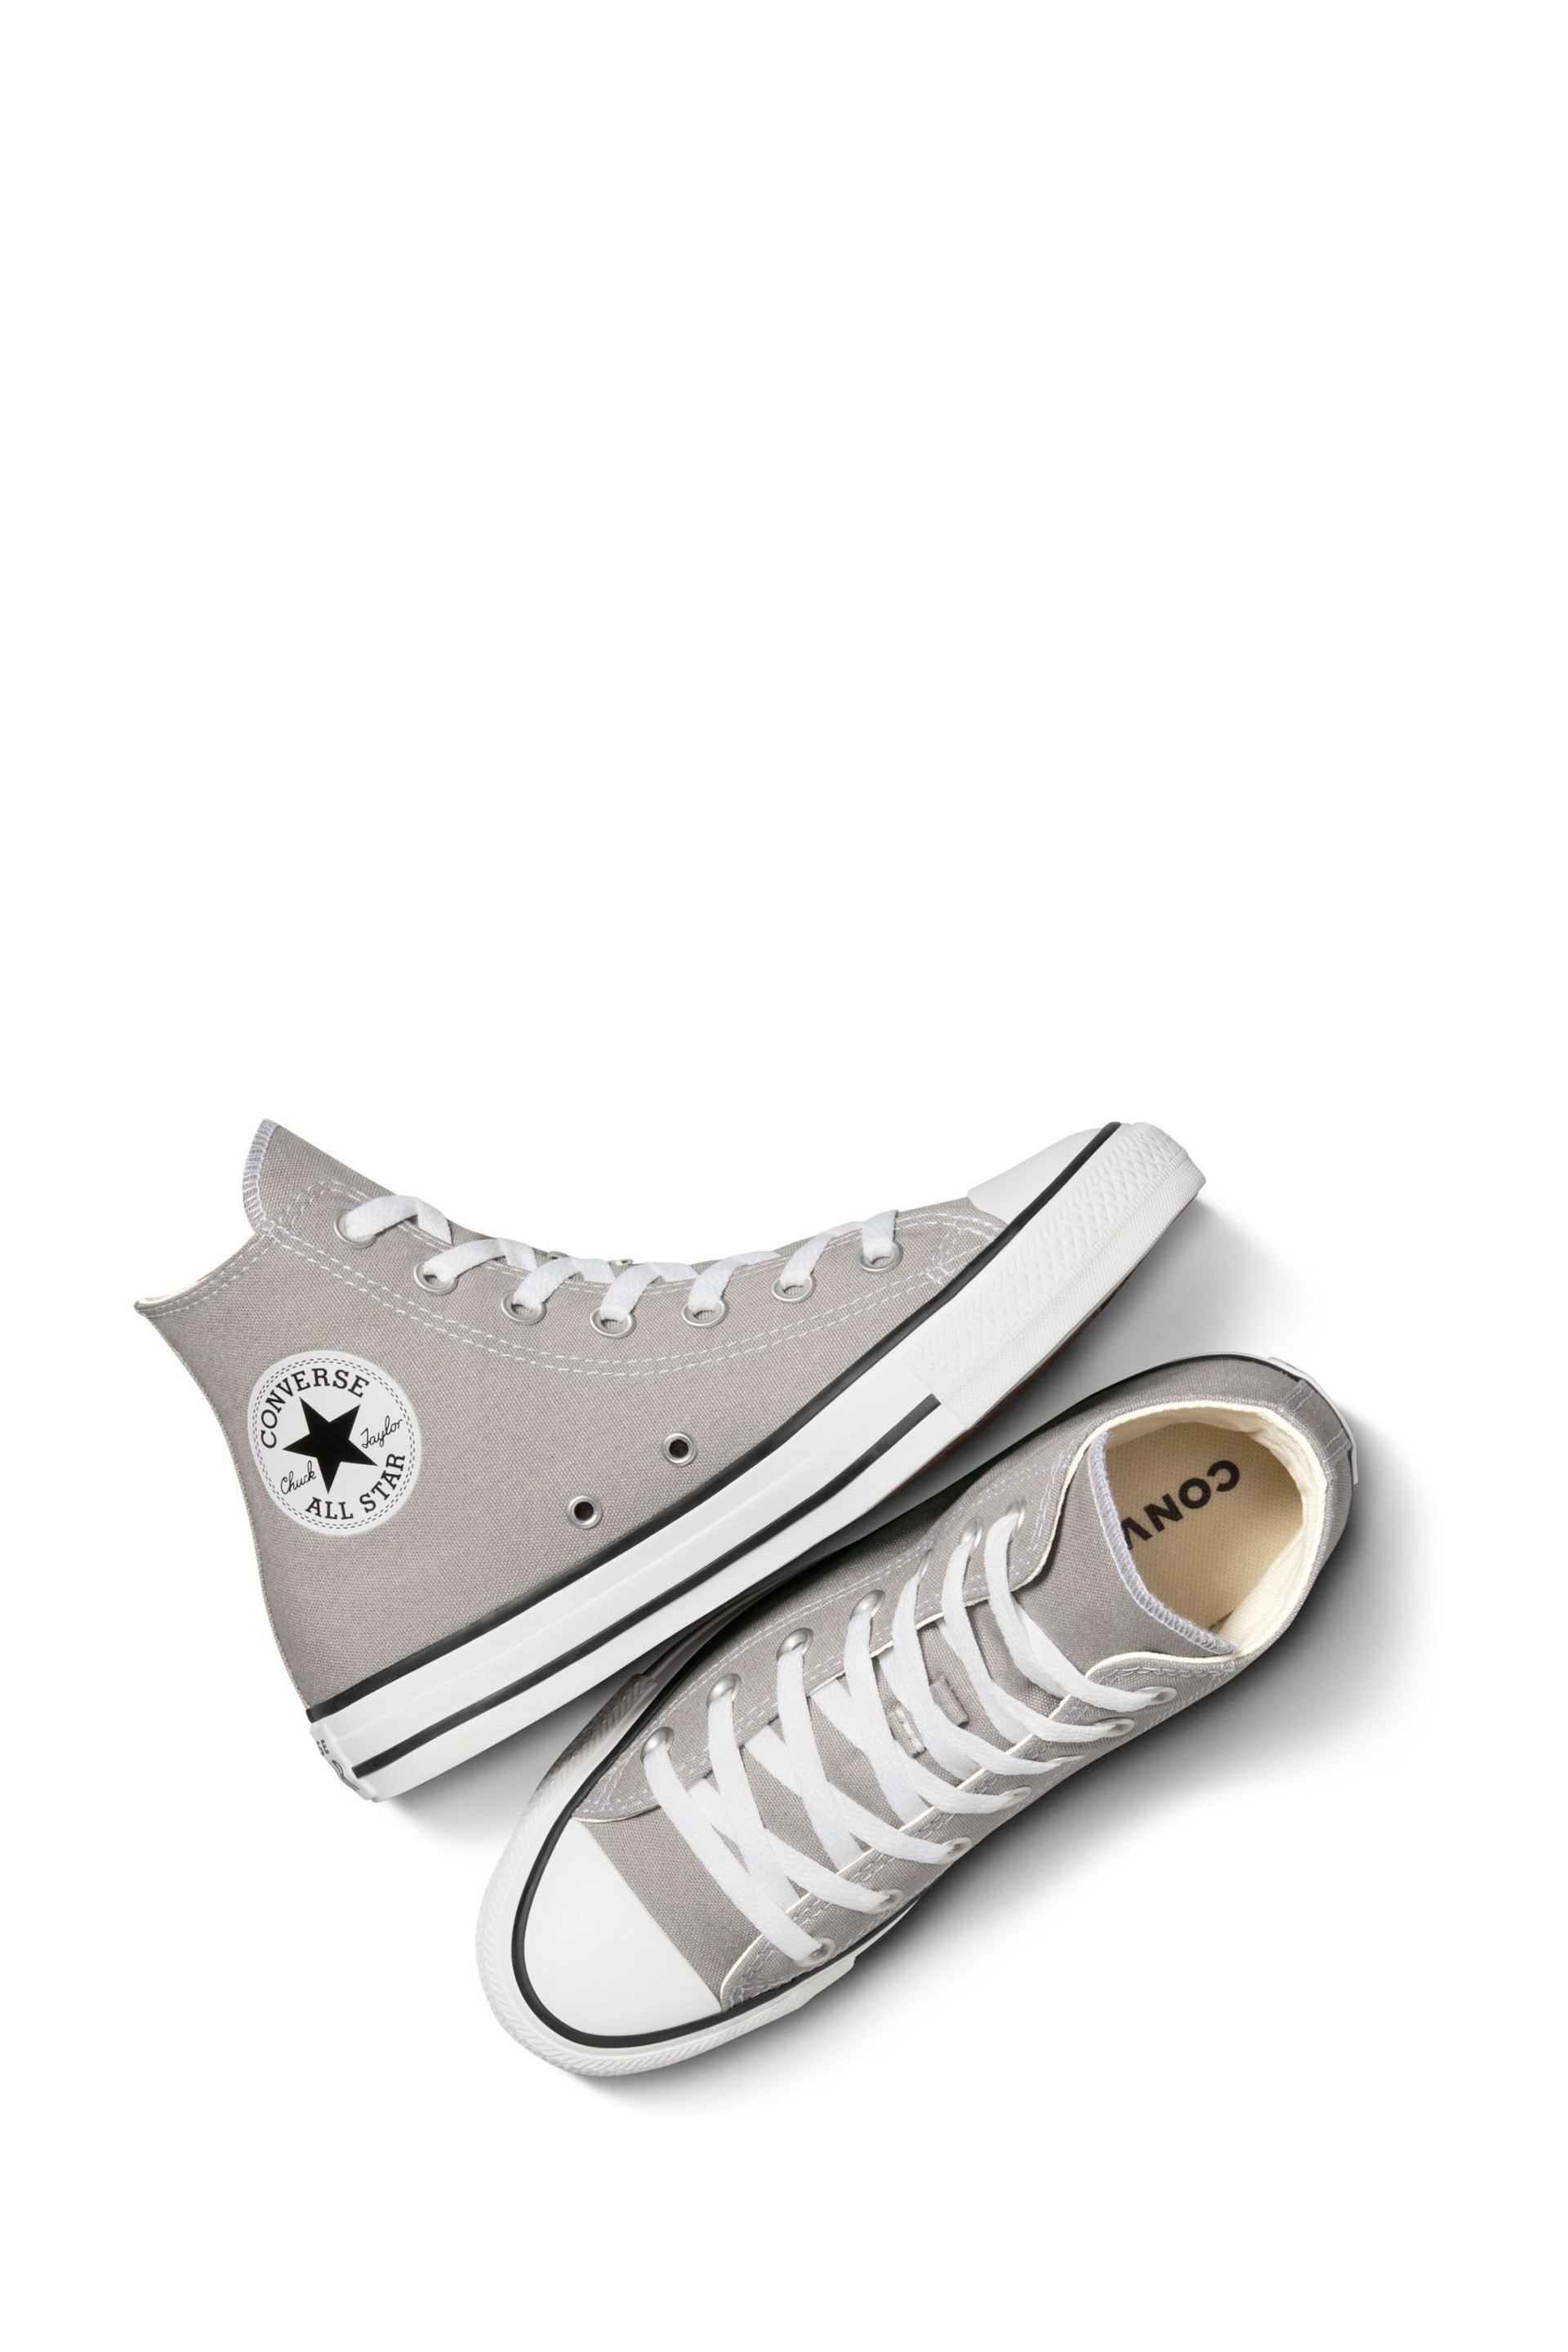 Converse Grey Chuck Taylor All Star Trainers - Image 5 of 7